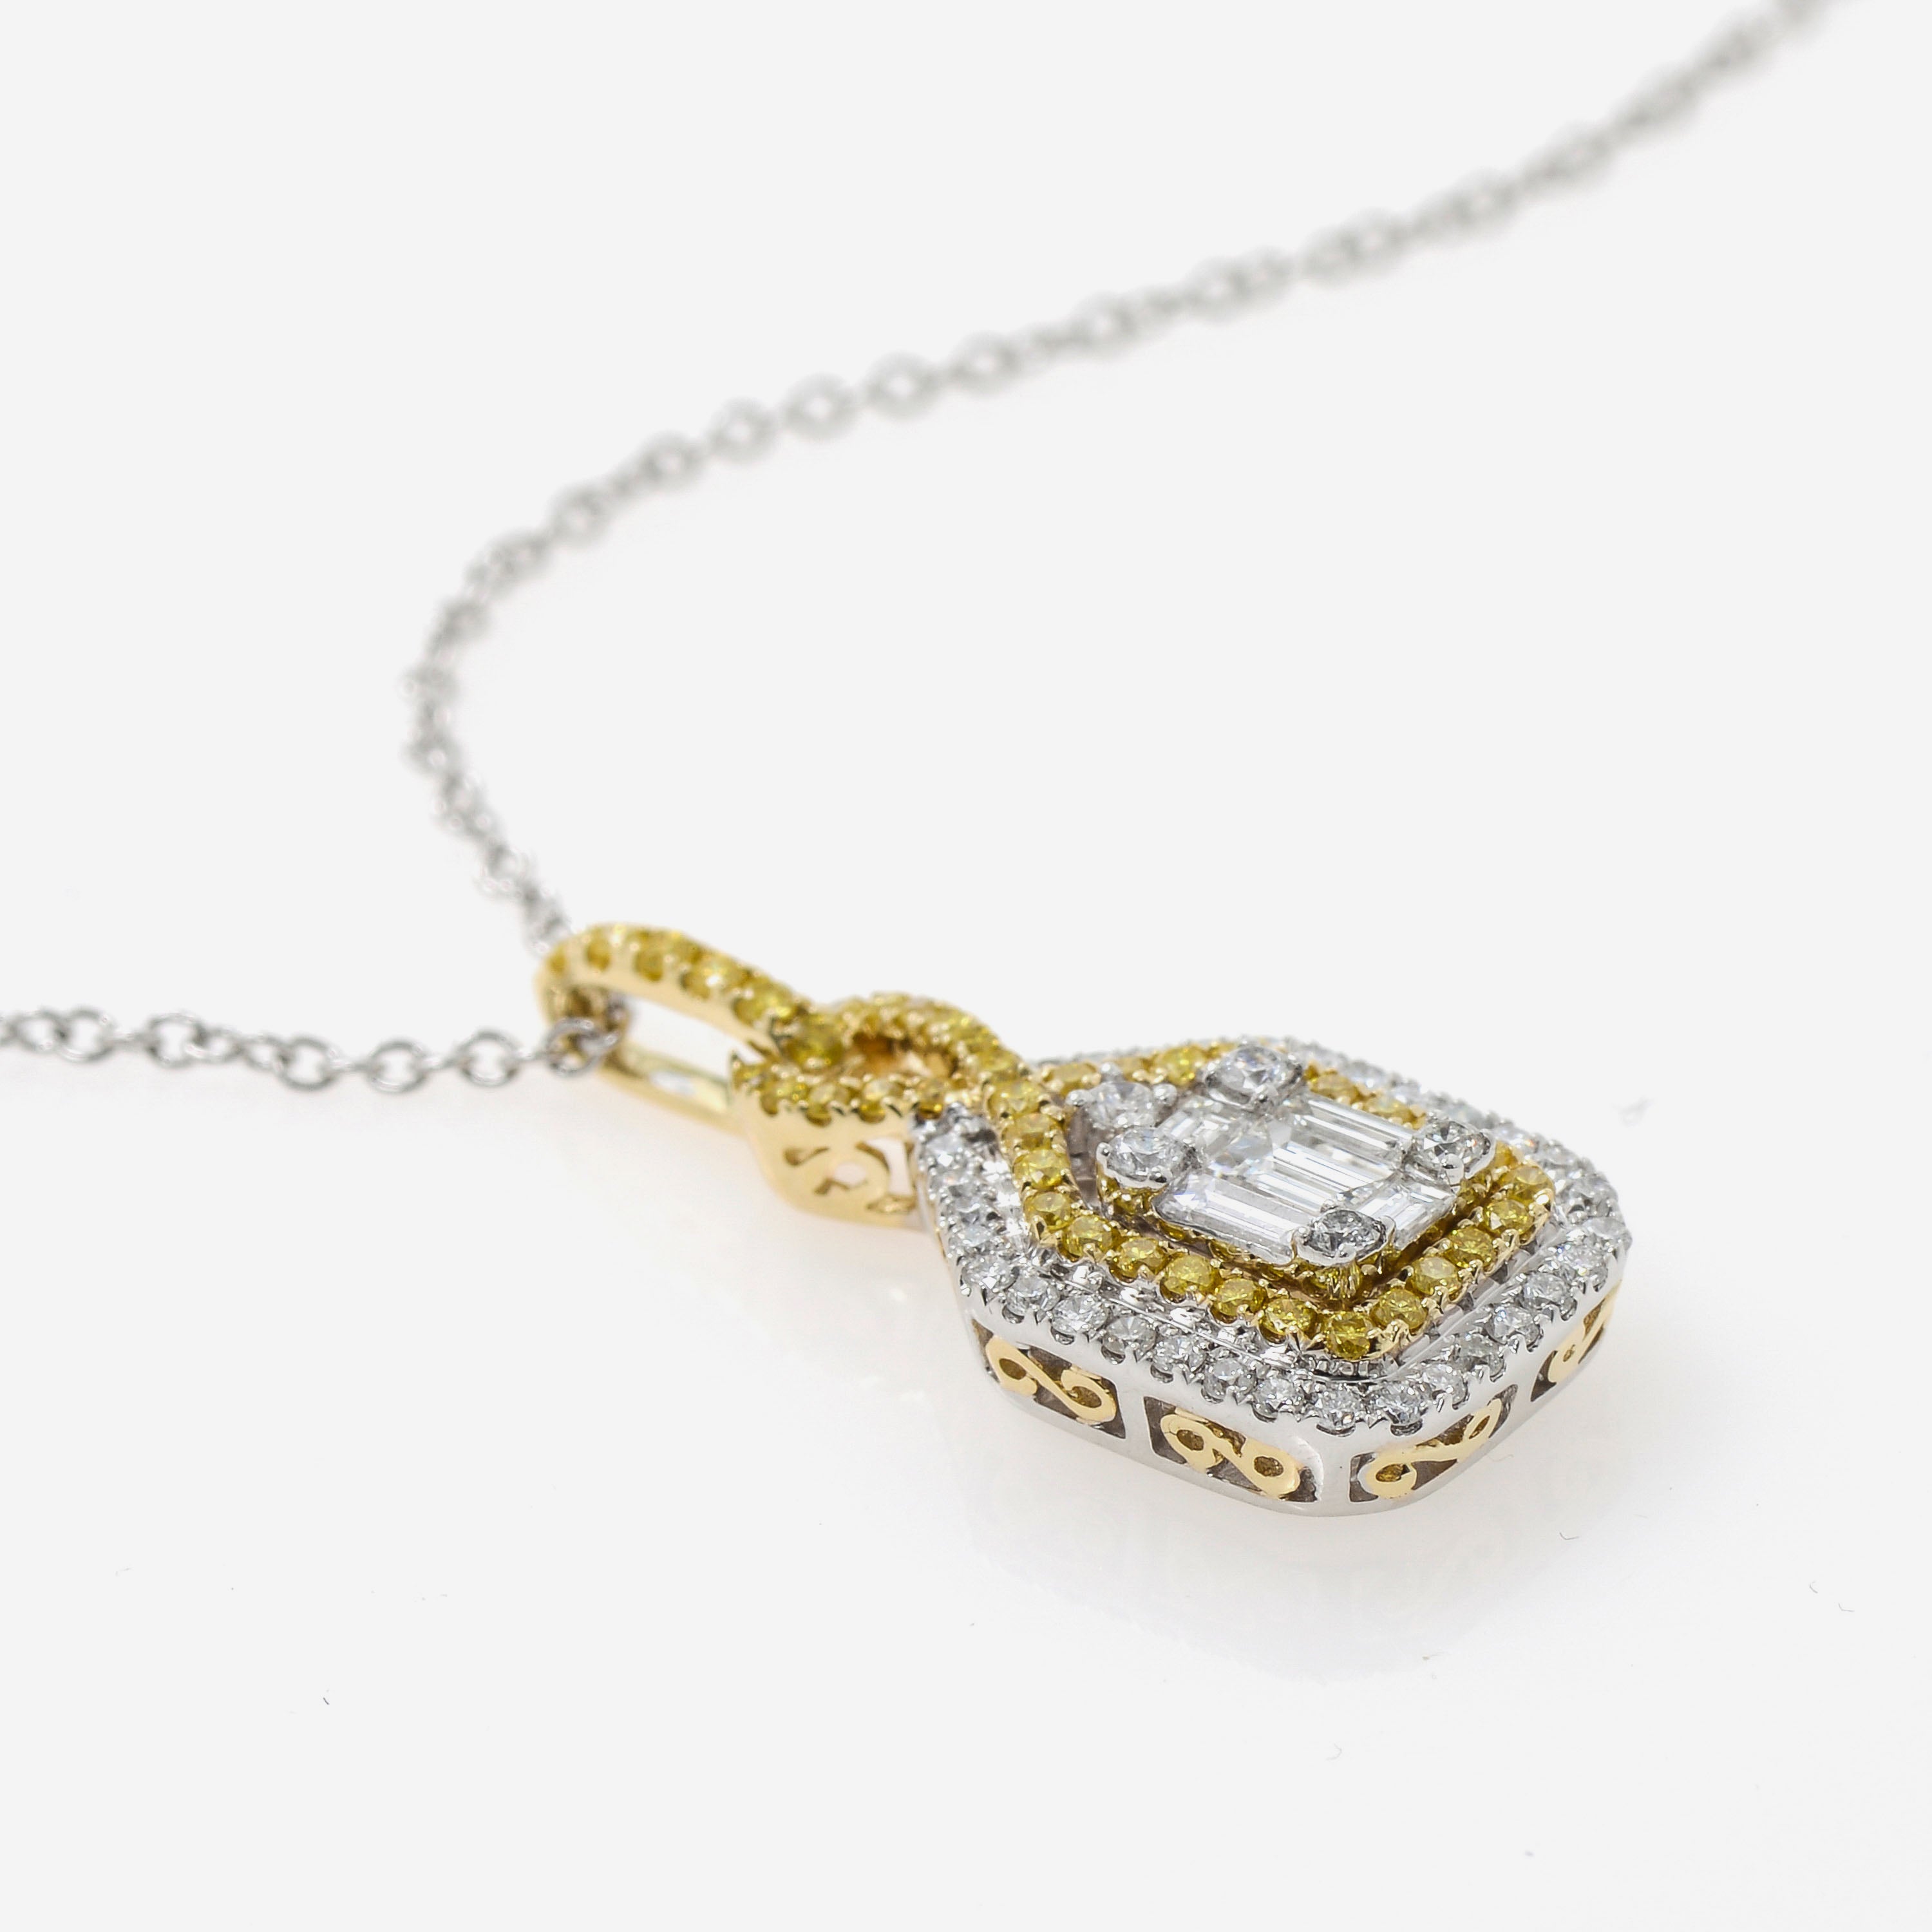 Gregg Ruth 14K White and Yellow Gold, White Diamond 0.47ct. tw. and Fancy Yellow Diamond Pendant Necklace 47285 - THE SOLIST